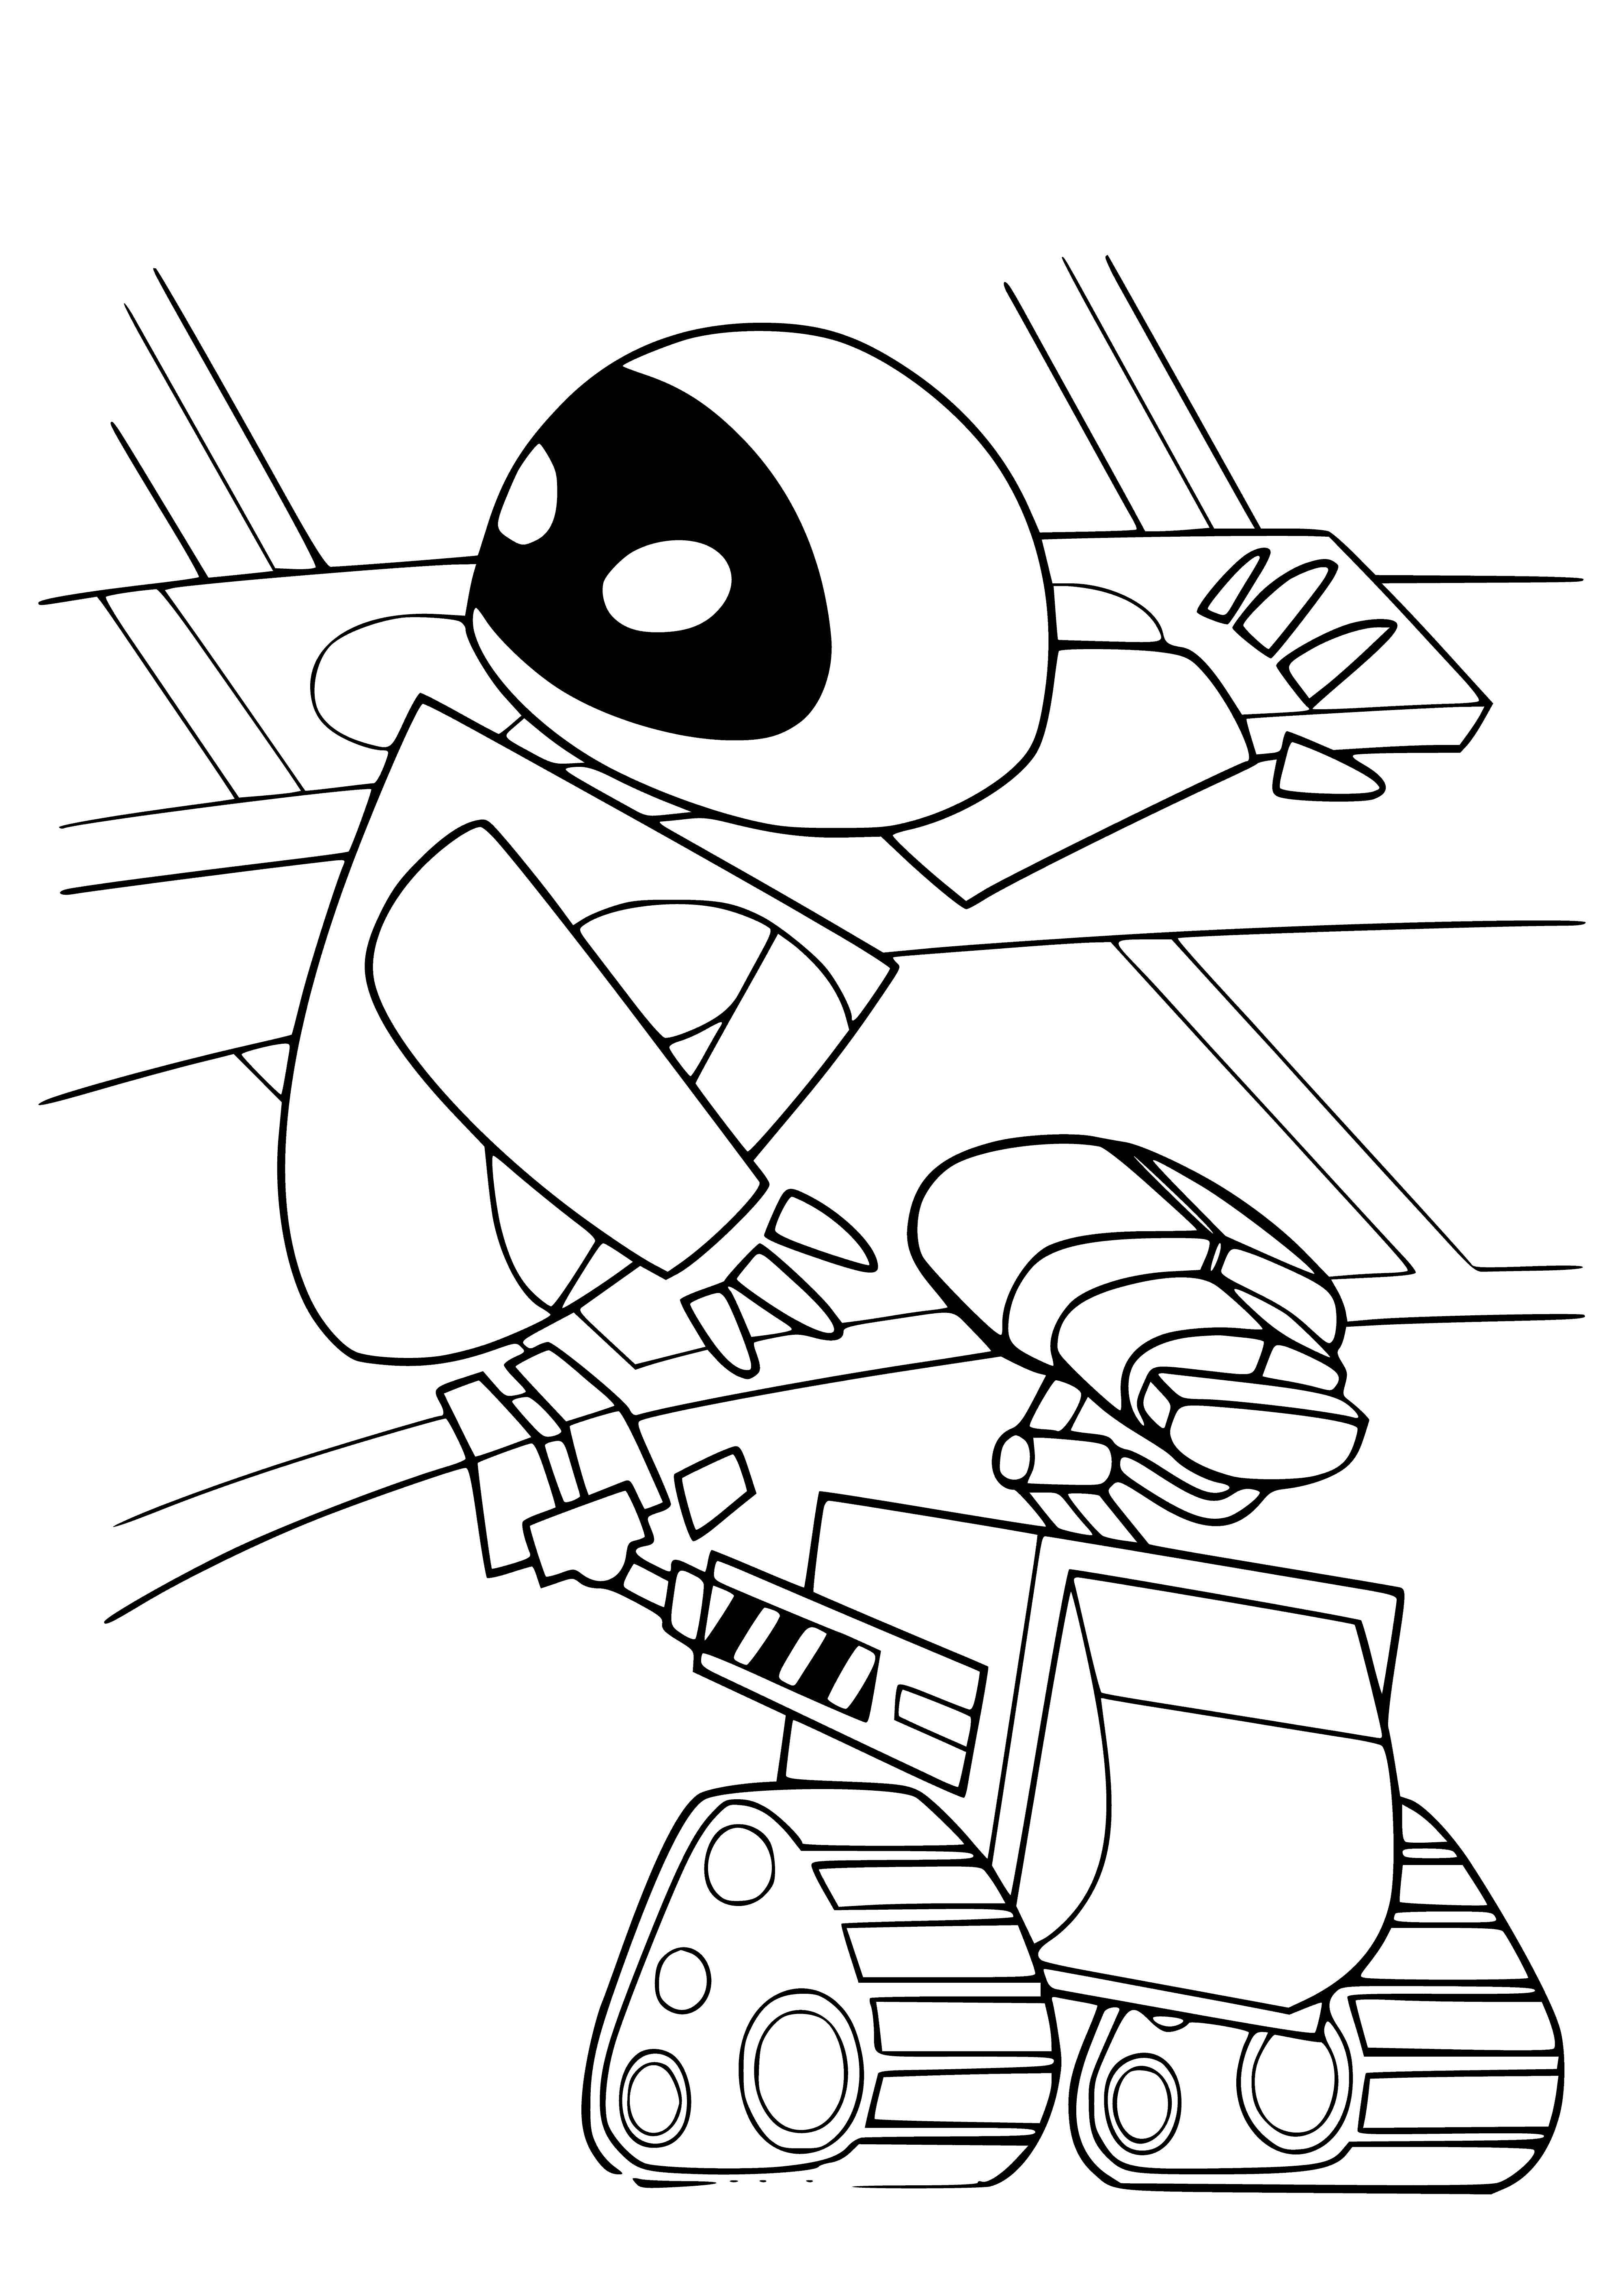 coloring page: Robots with battered bodies and curious expressions face off, one with a red eye and tall frame and the other with big blue eyes and a domed head.